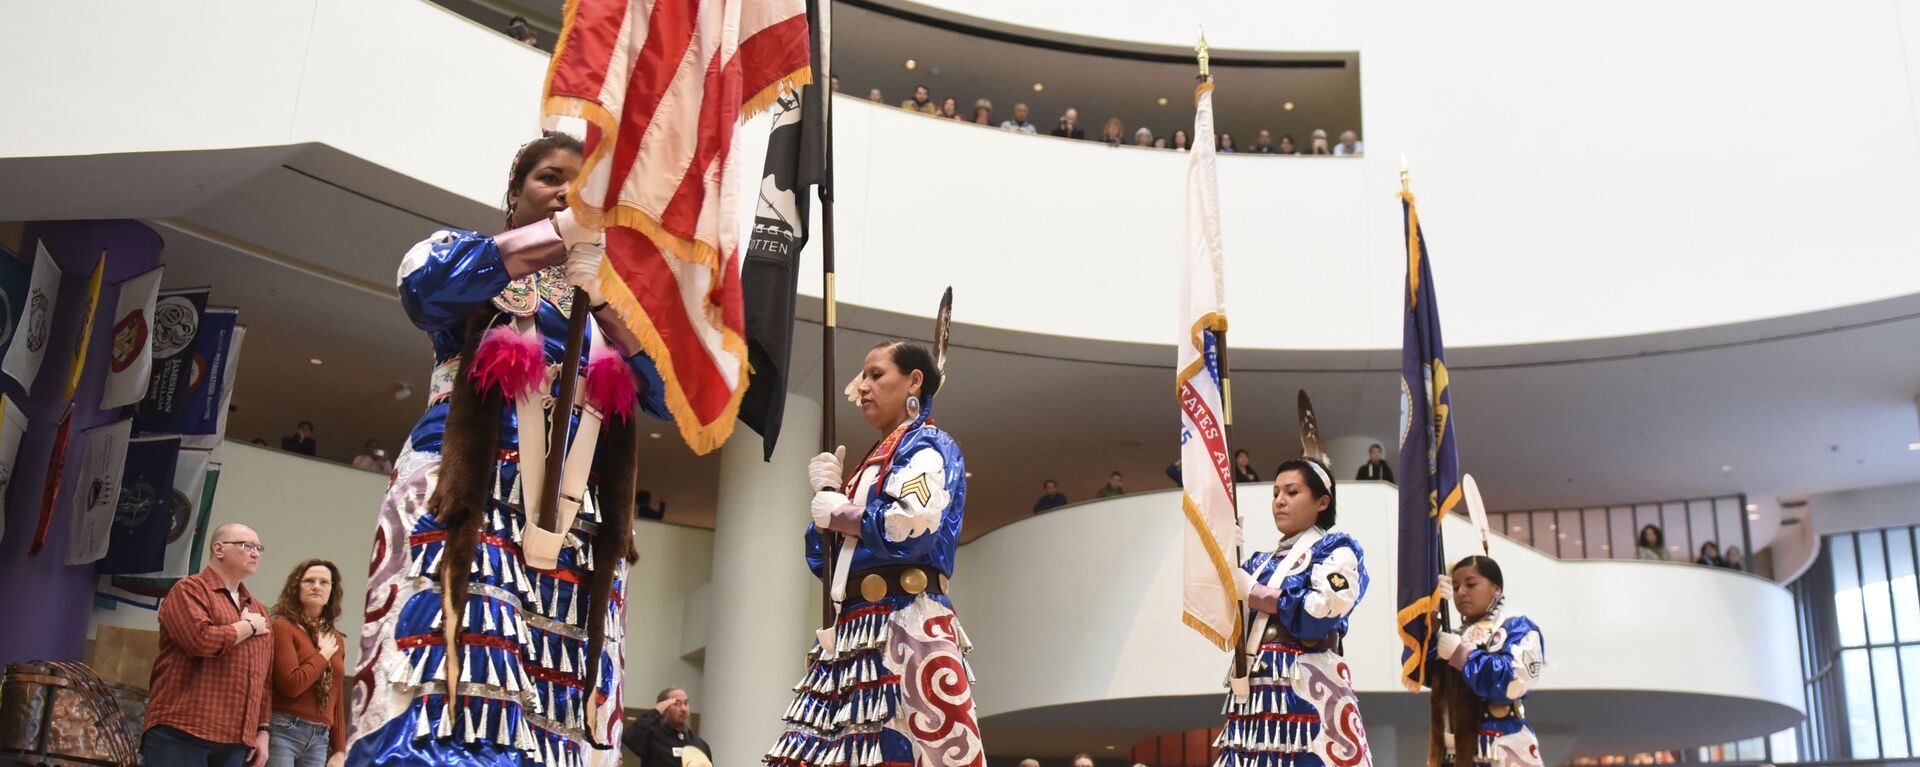 Native American Women Warriors, from left, Takara Matthews (Sokoki Abenaki/Lumbee) Jamie Awonohopay (Menominee), Elizabeth Haas (Northern Arapaho Tribe), Antonia Thomas (Navajo), all veterans of the U.S. Armed Forces, take part in the Presentation of the Colors during a Veterans Day celebration at Smithsonian's National Museum of the American Indian on Friday, Nov. 11, 2016 in Washington - Sputnik International, 1920, 09.08.2022